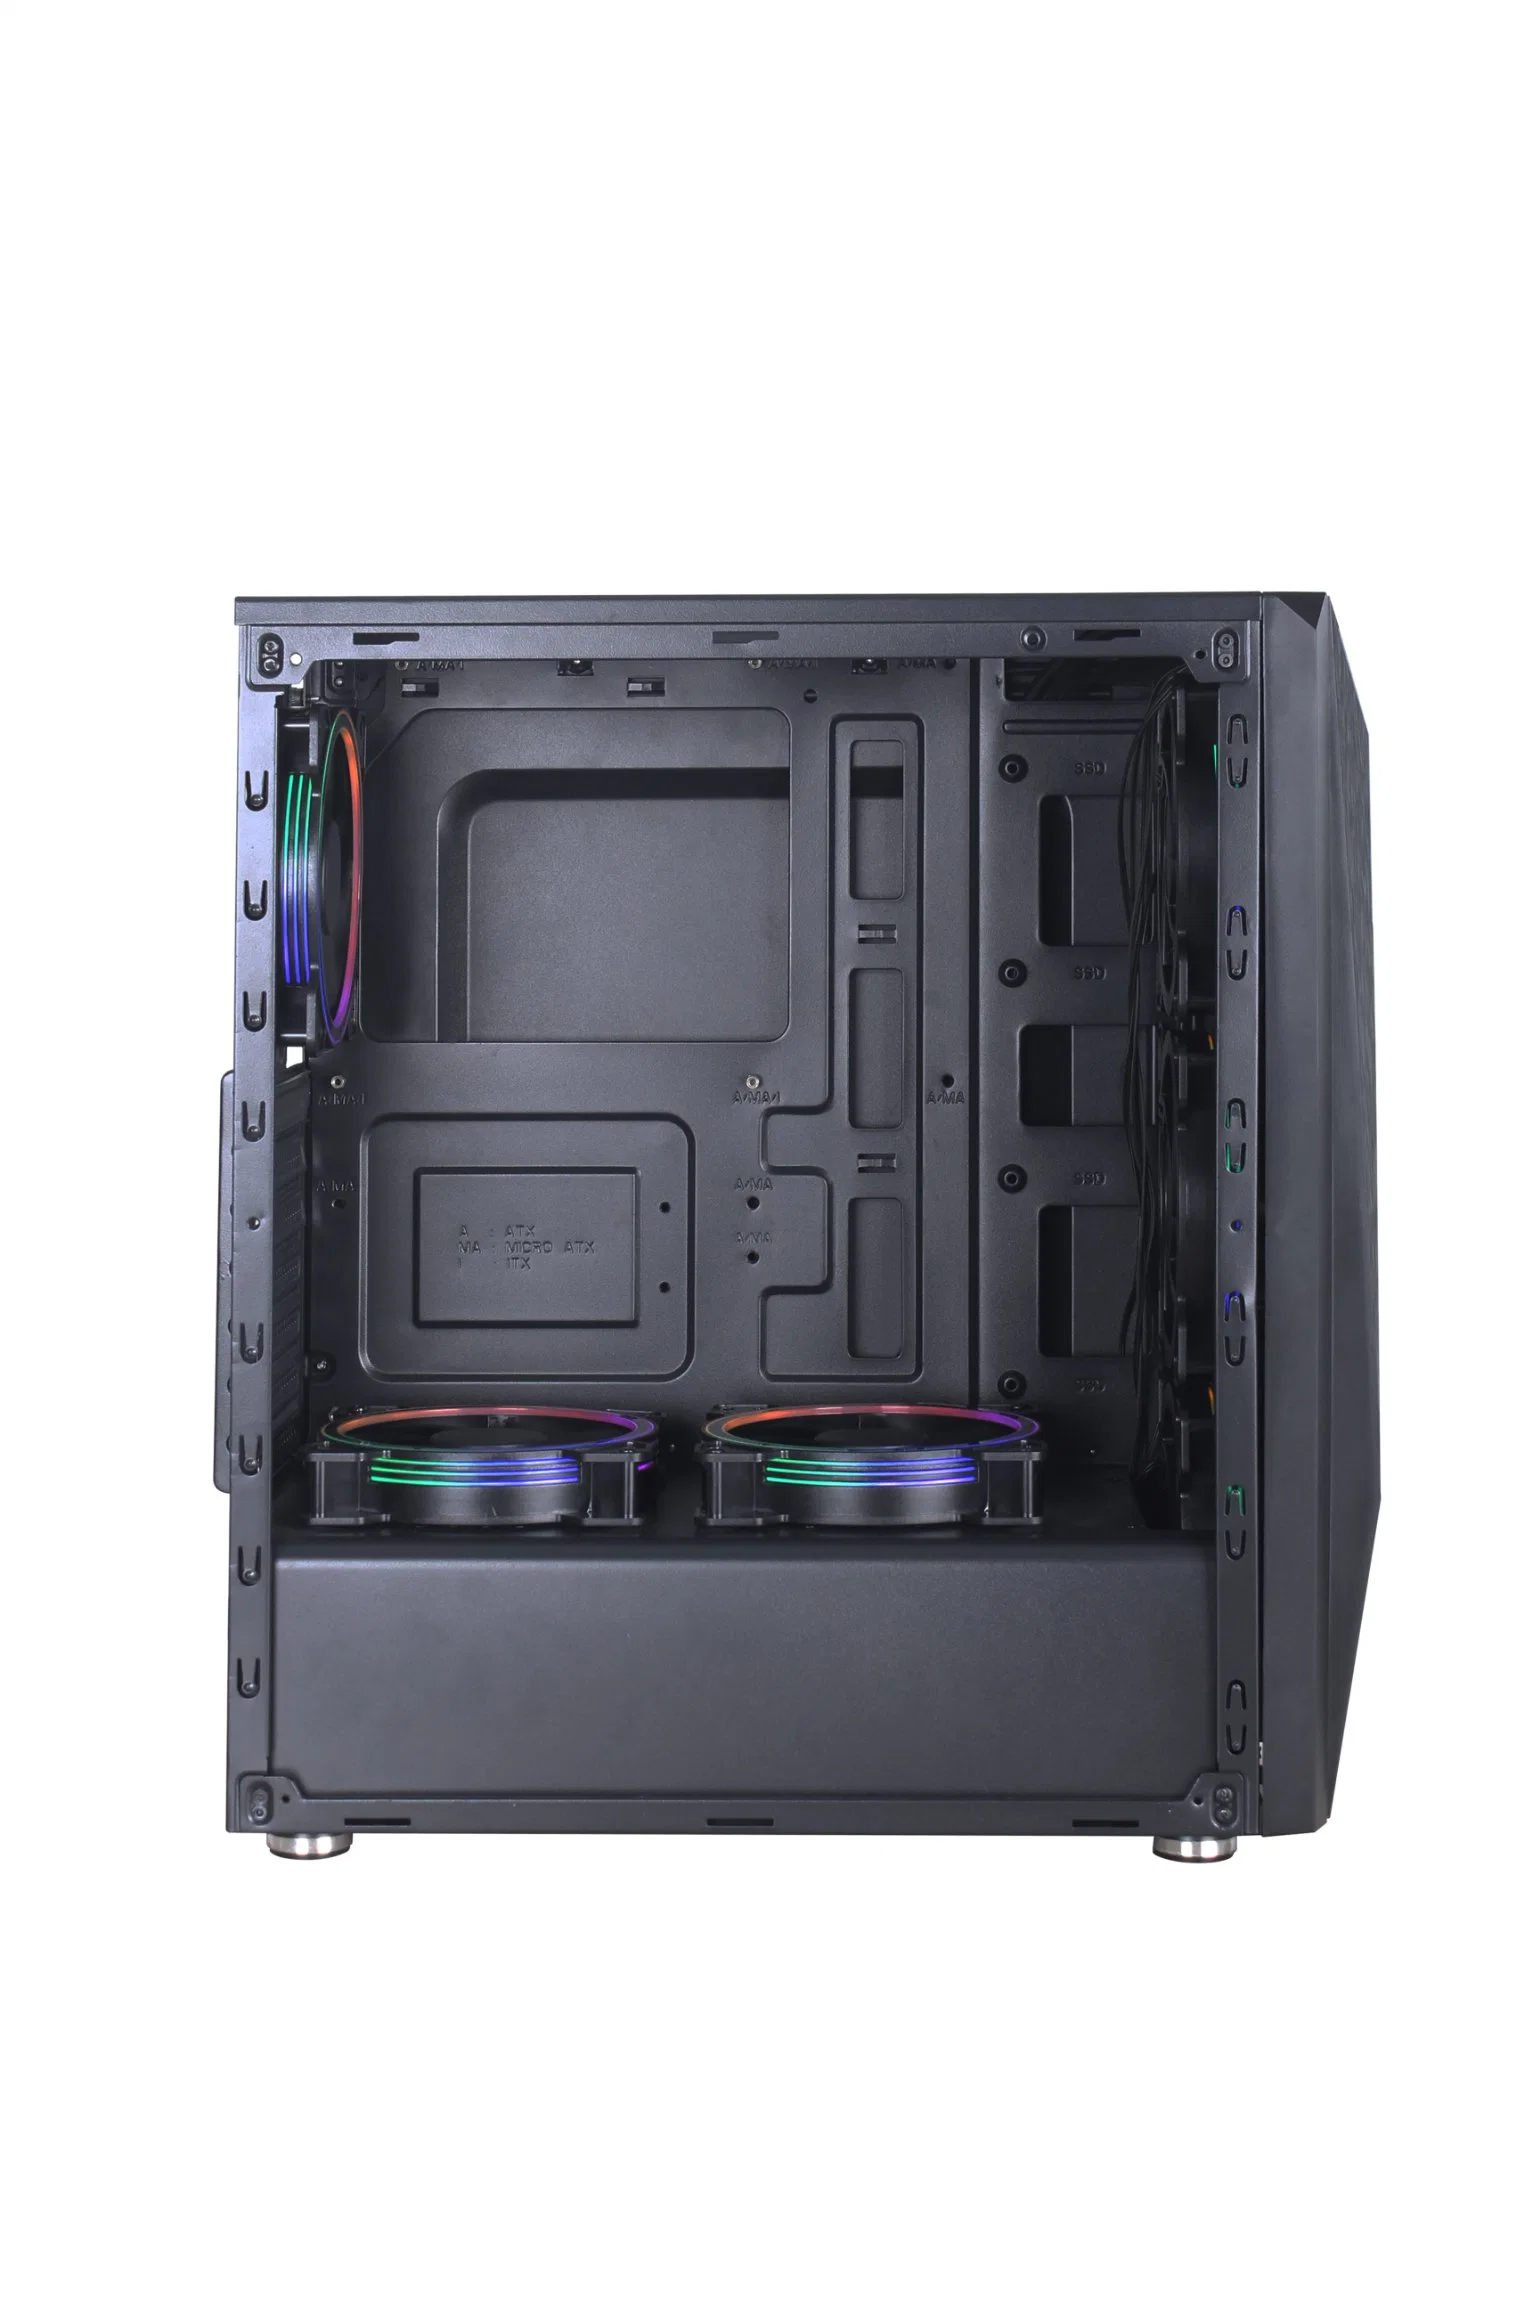 New Design with Glass Side ATX Computer Cabinet Gaming PC Case